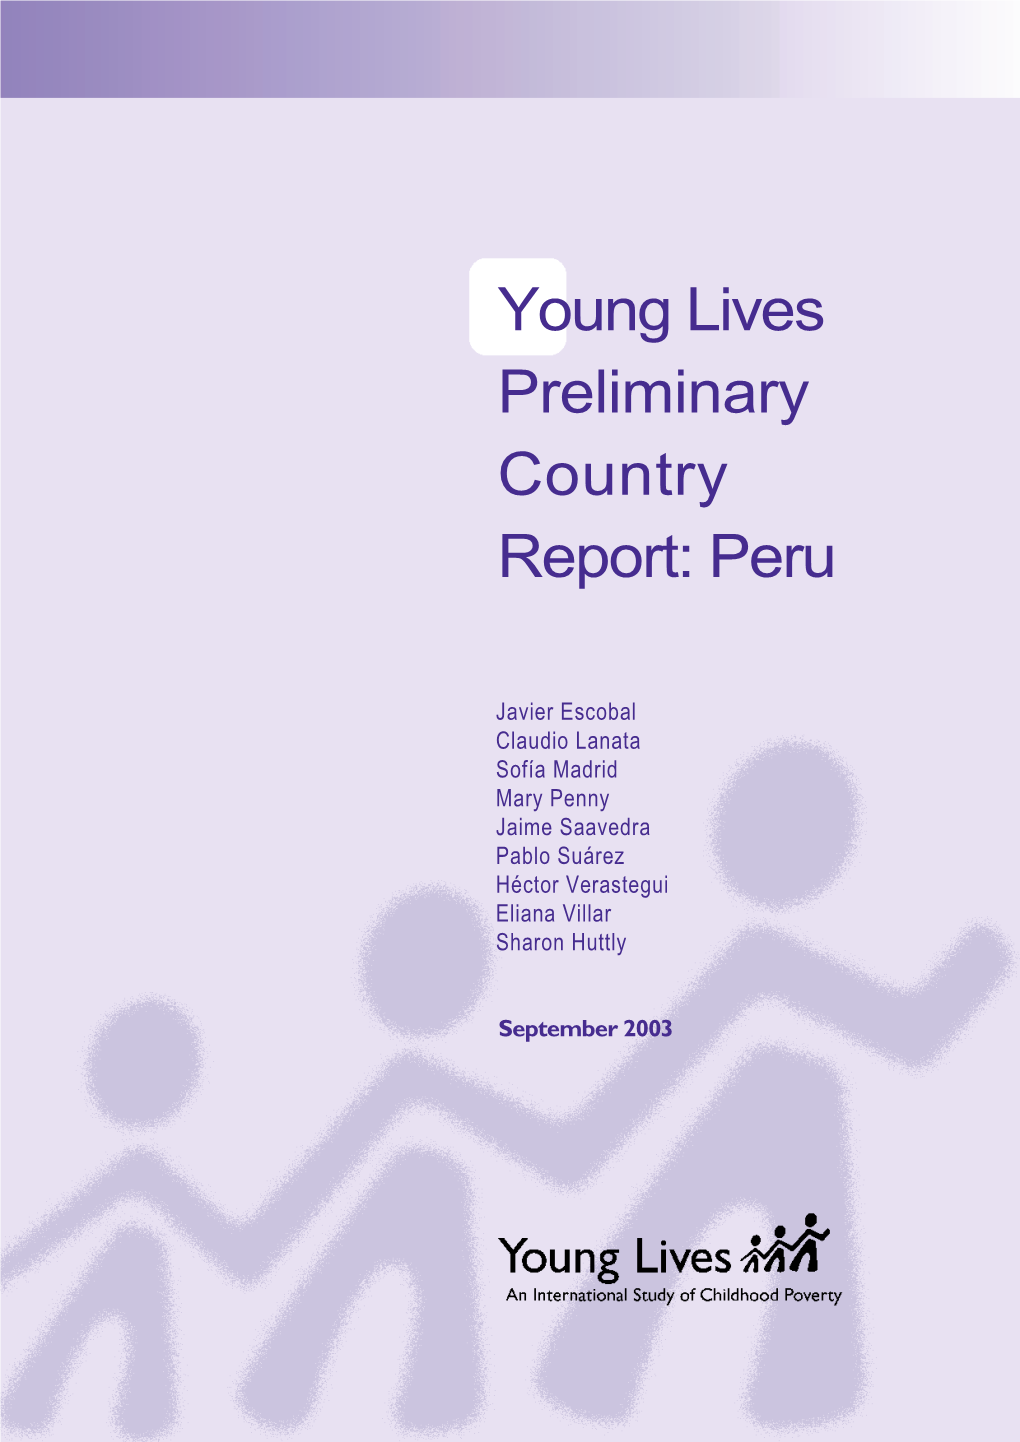 Young Lives Preliminary Country Report: Peru